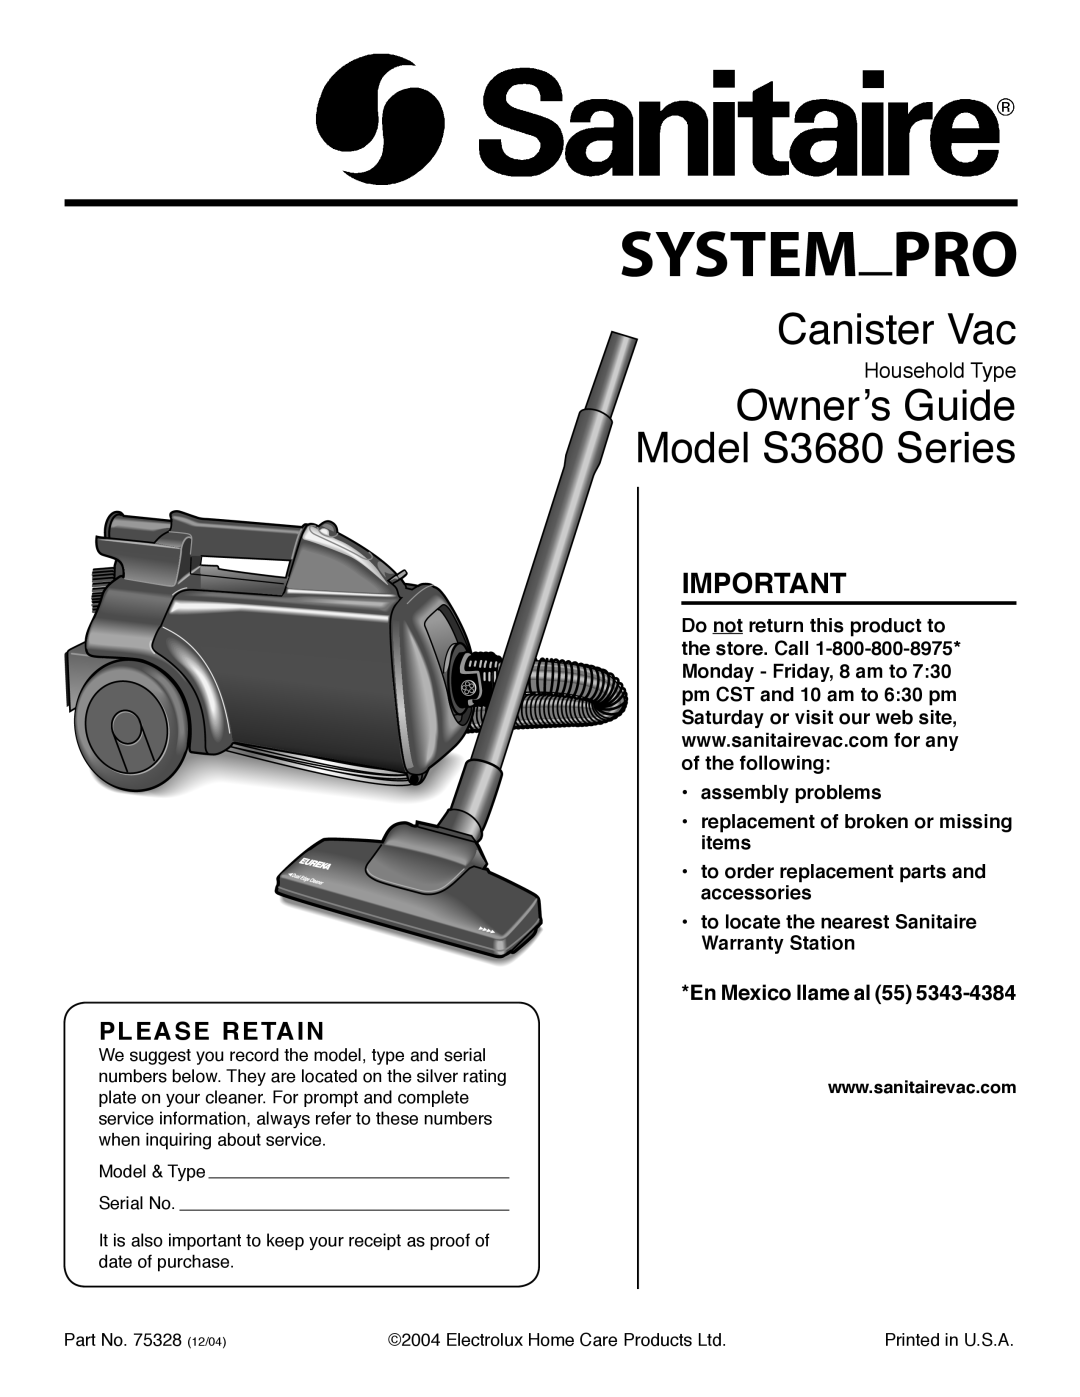 Sanitaire warranty En Mexico llame al, Canister Vac, Ownerʼs Guide Model S3680 Series, Please Retain 